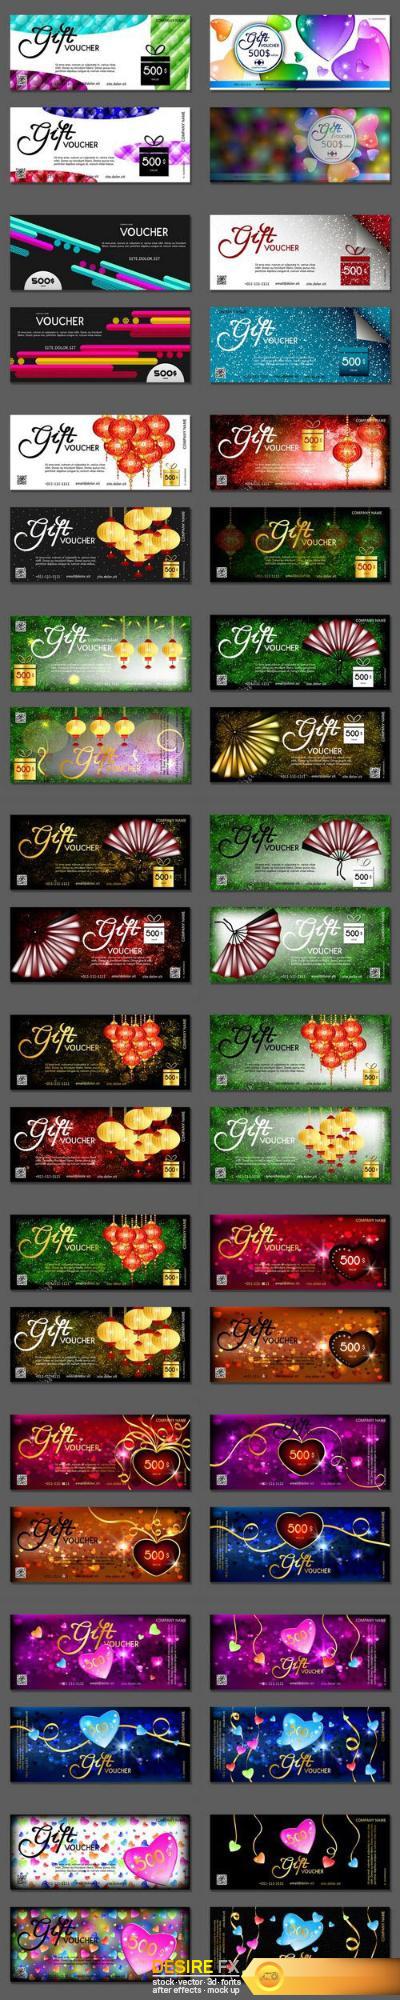 Collection of gift cards and vouchers 6 - Set of 20xEPS Professional Vector Stock